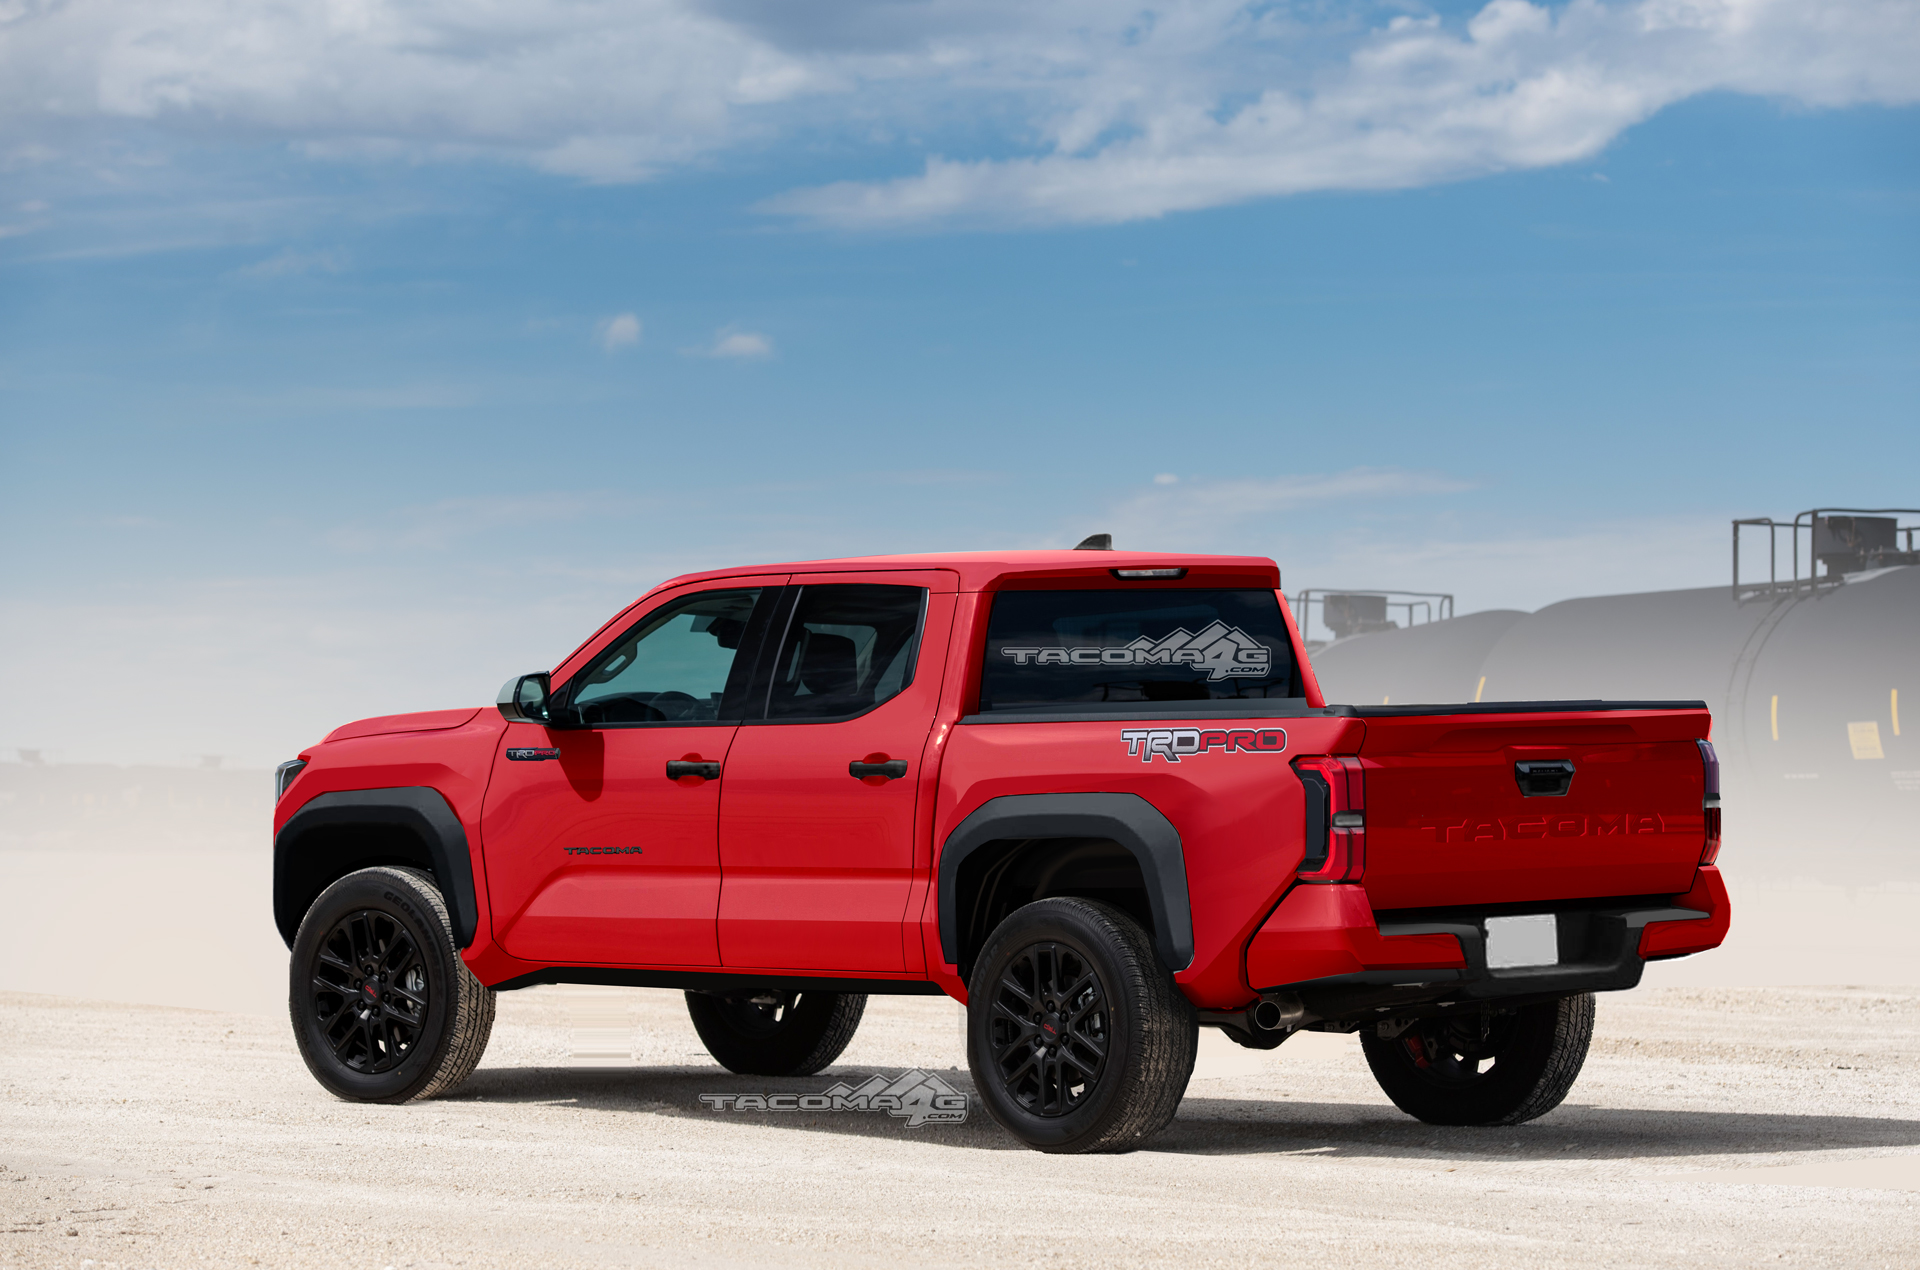 2024 Tacoma Our 2024 Toyota Tacoma TRD PRO Preview Renderings! Tacoma-2023-rear-Red1